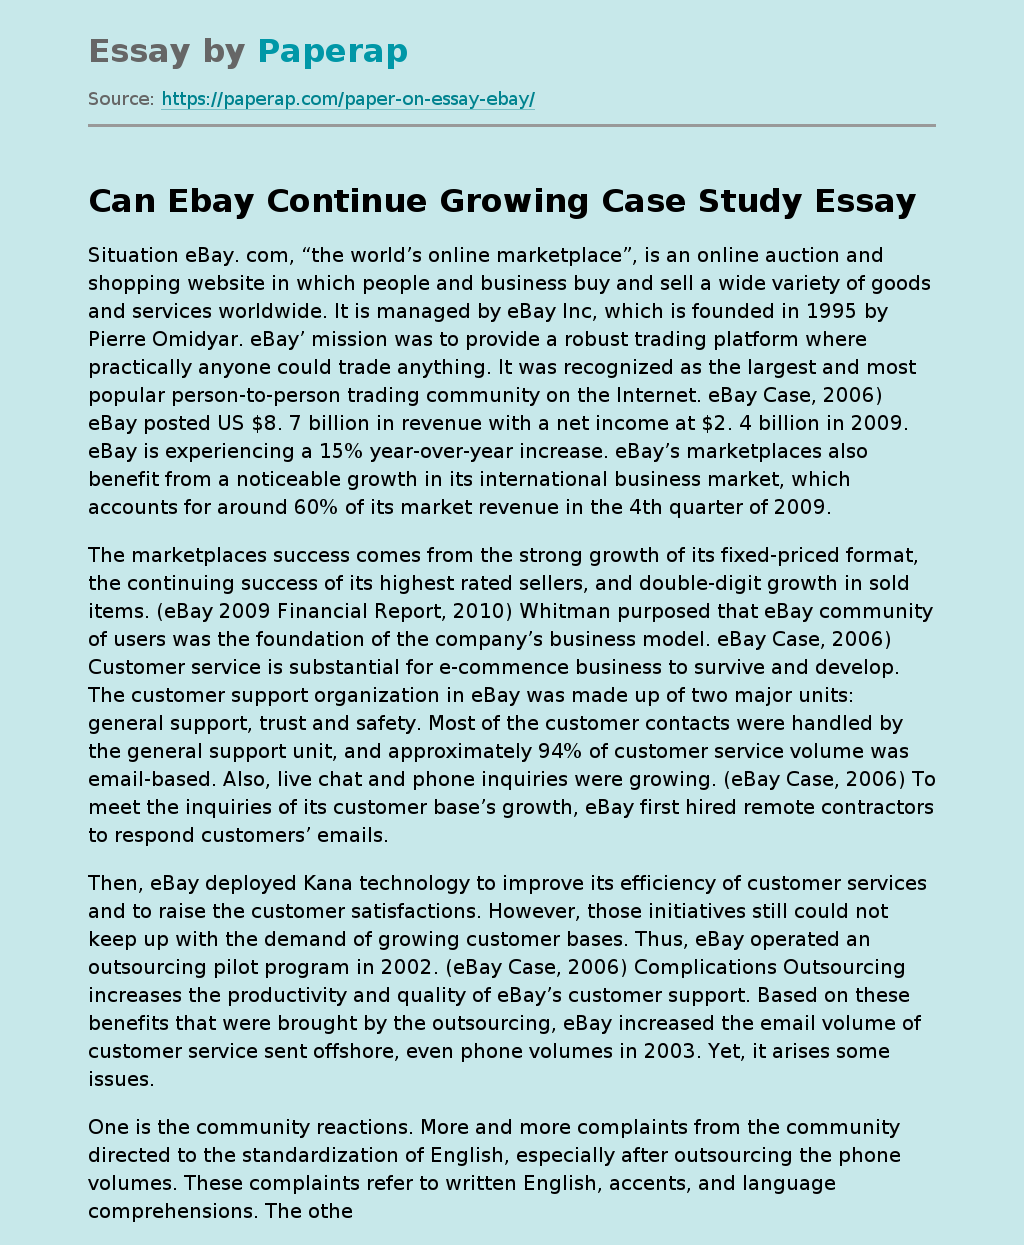 Can Ebay Continue Growing Case Study